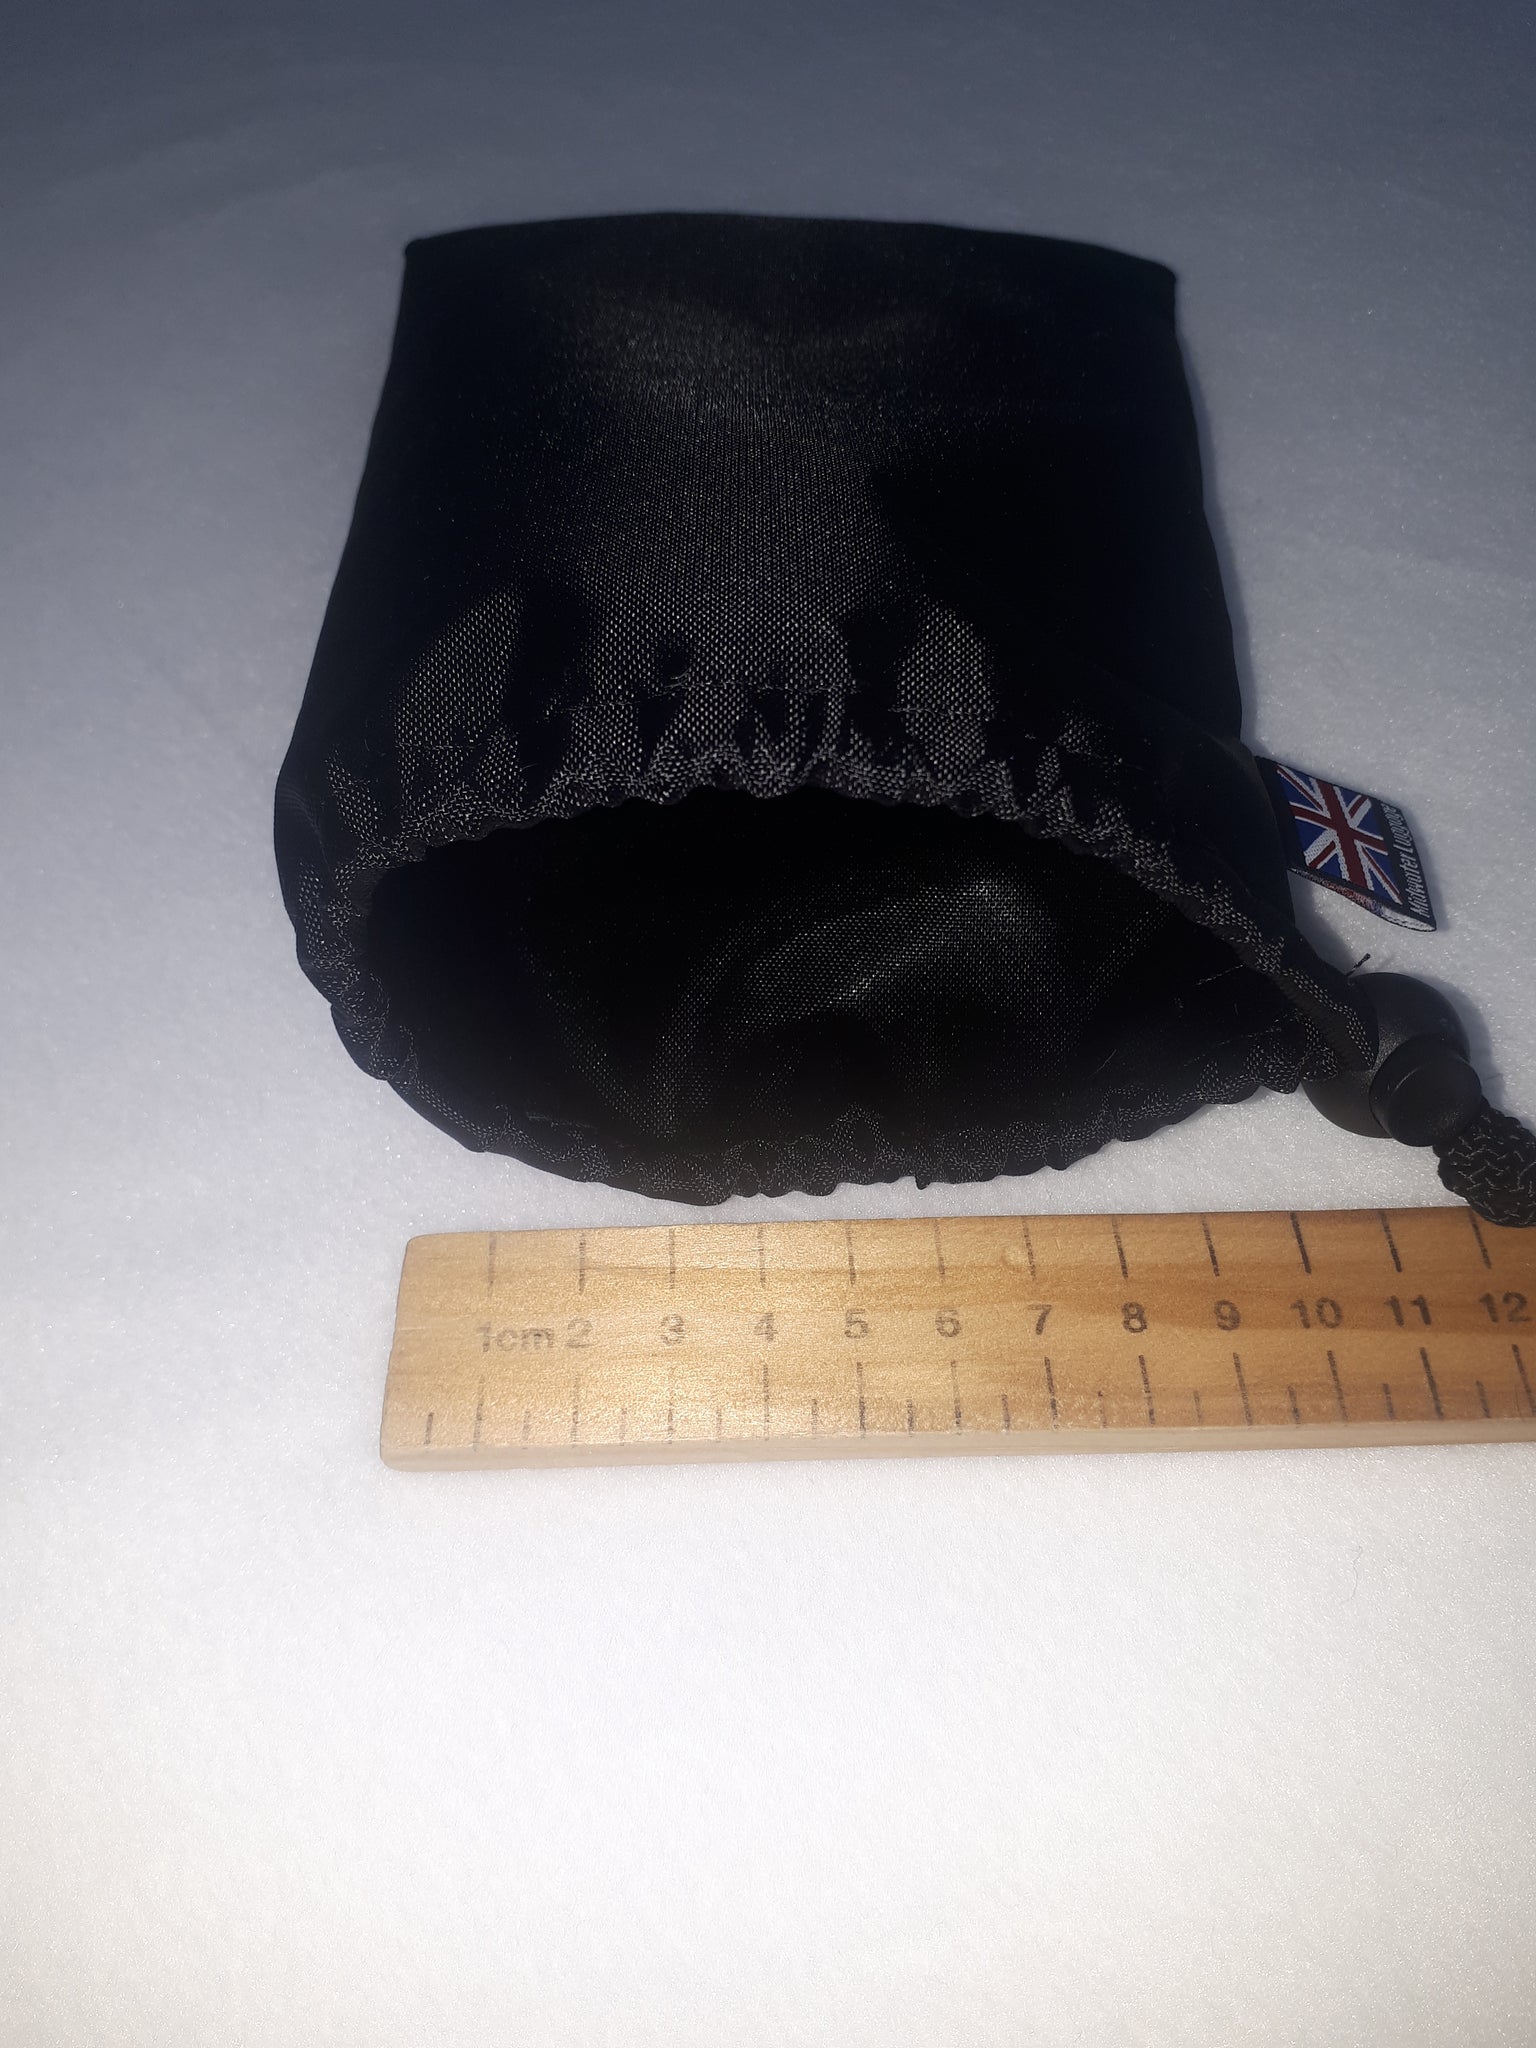 Midwater Spare Spool Pouch for Midwater Reel Cases